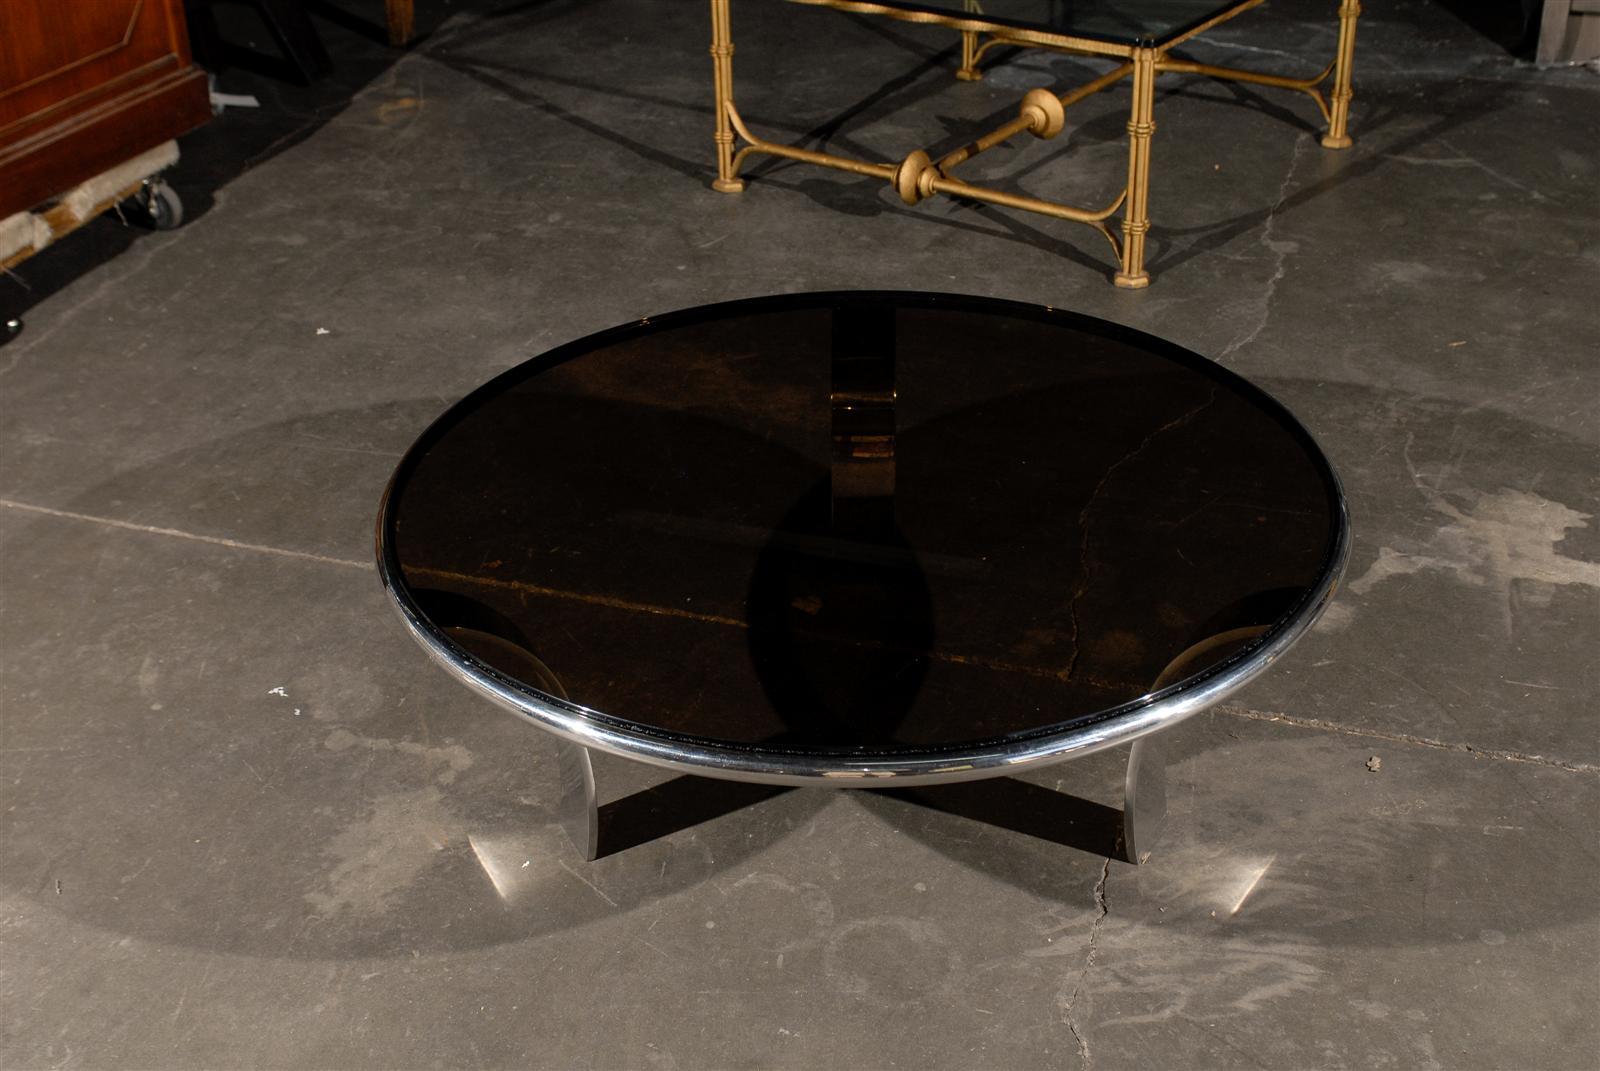 Mid-20th century round chrome coffee table with smoky glass top.